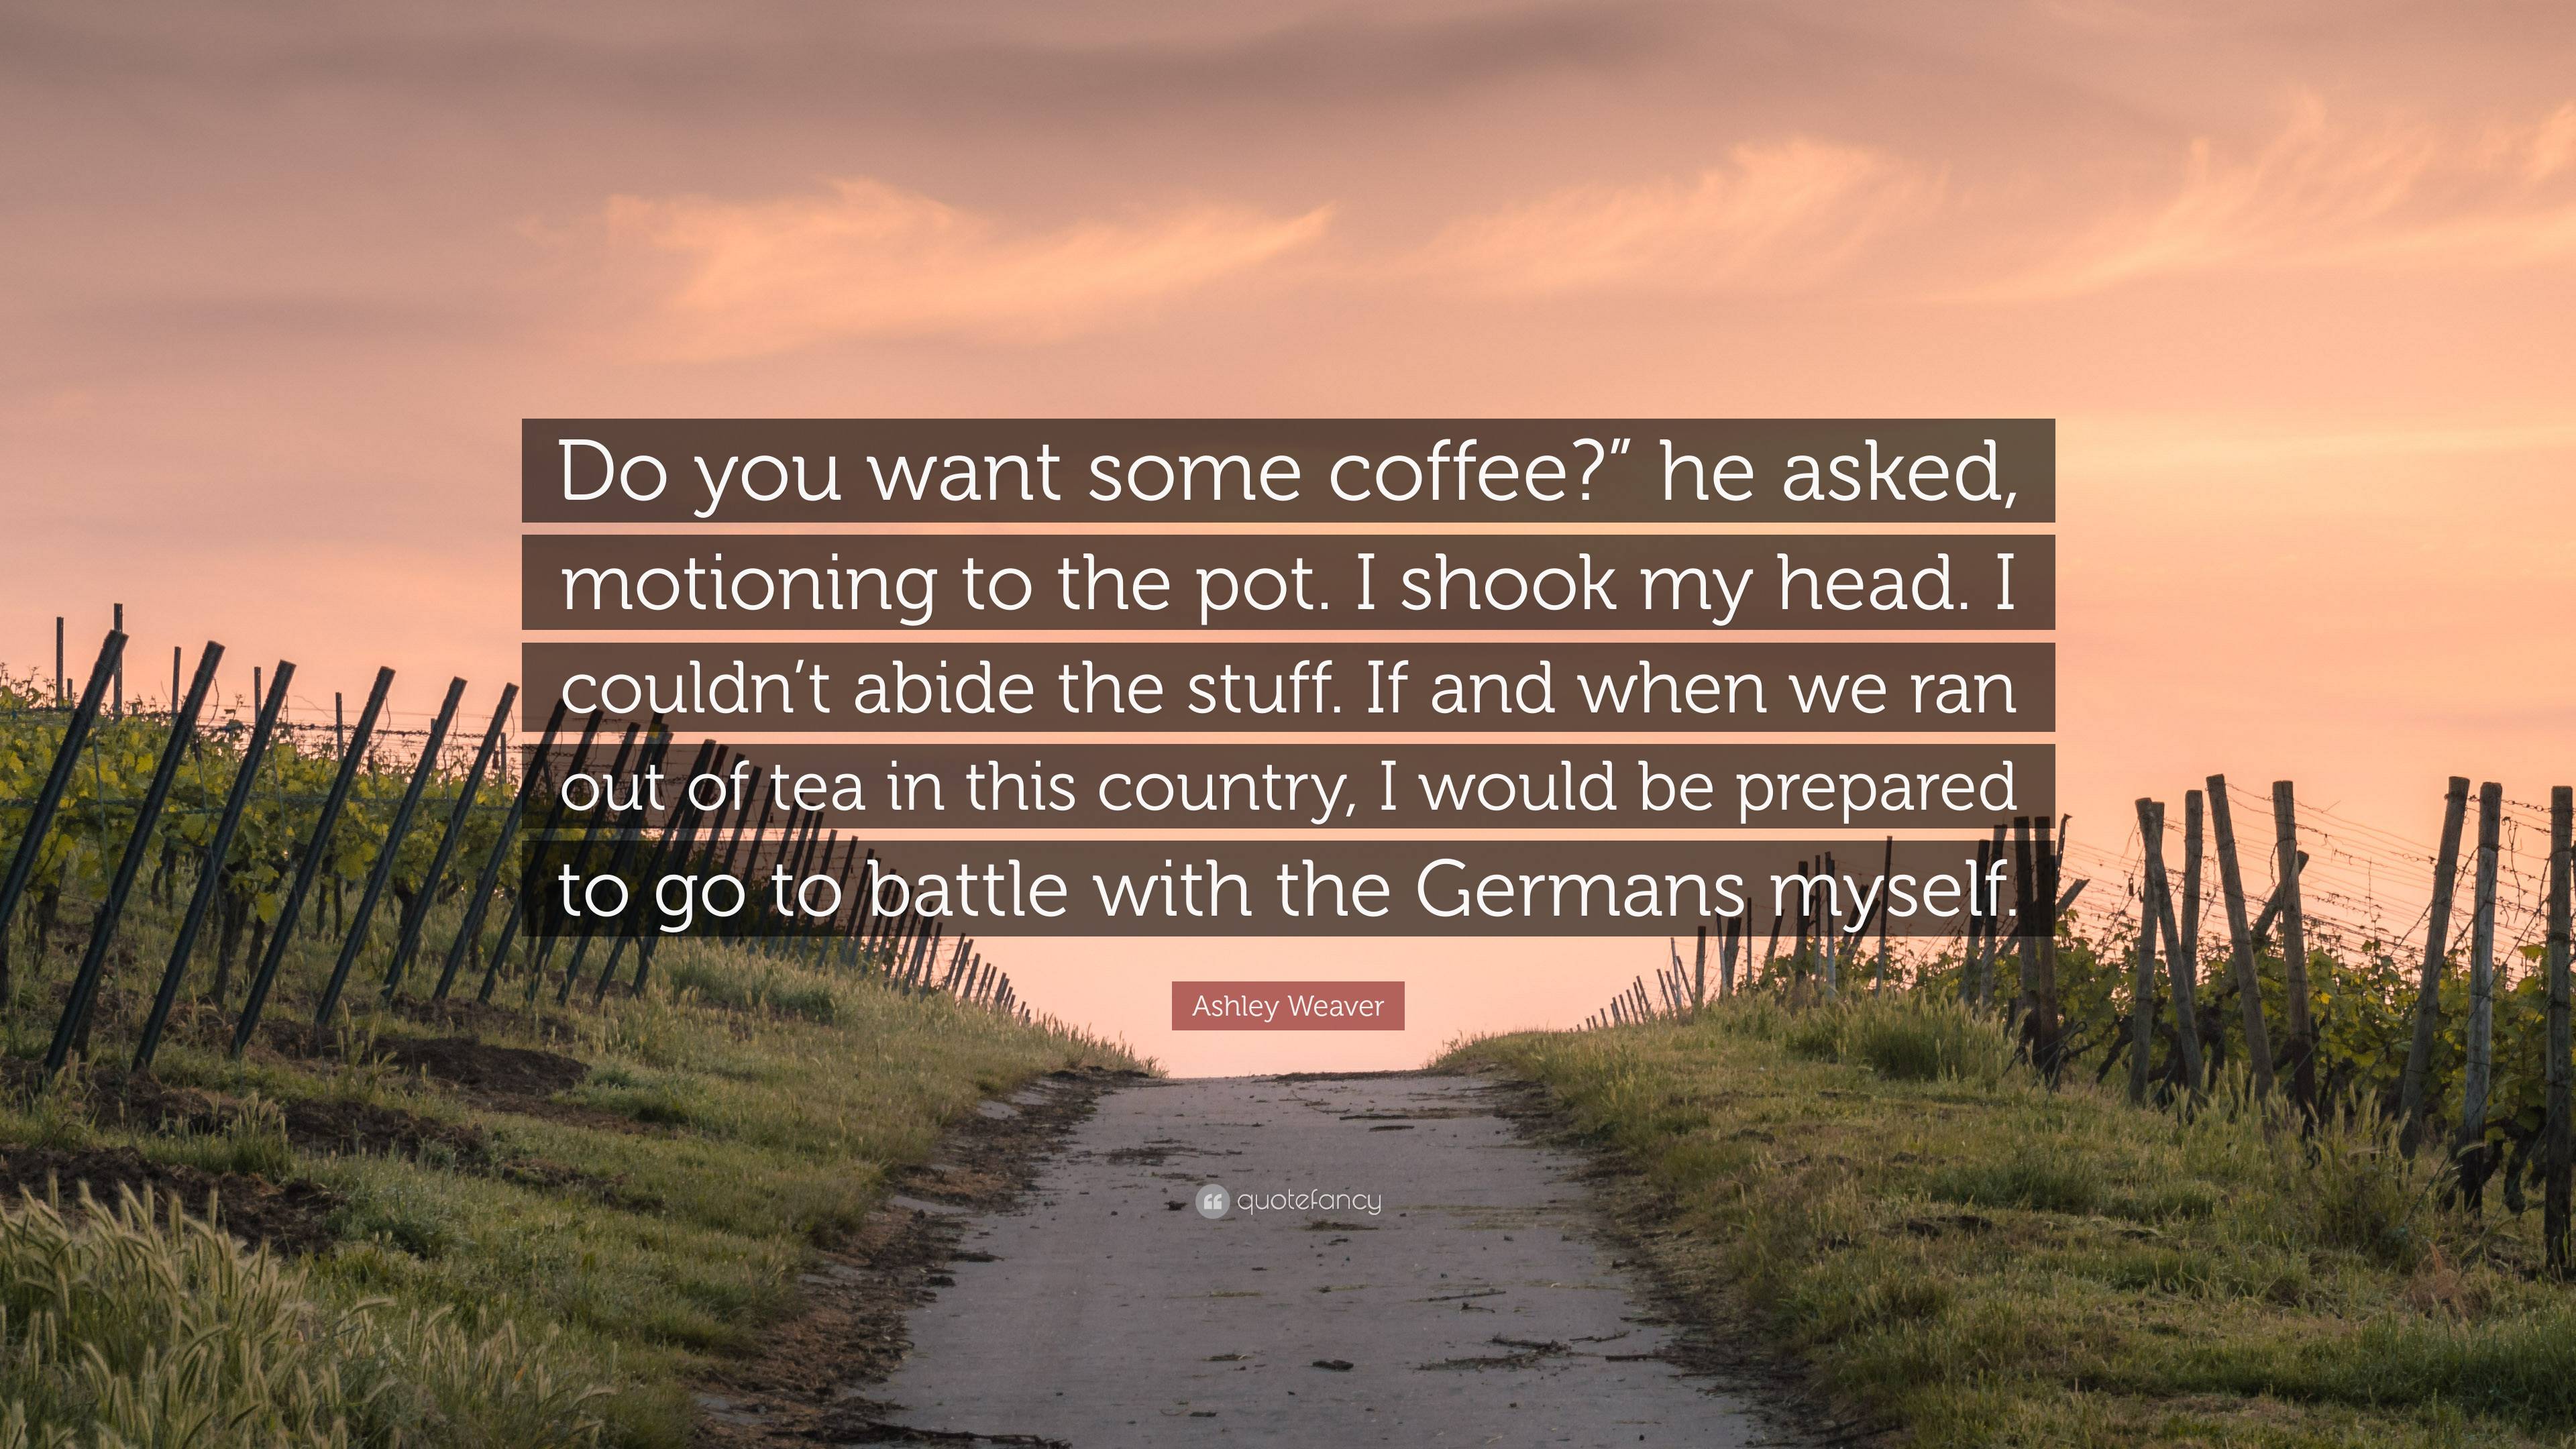 https://quotefancy.com/media/wallpaper/3840x2160/7531584-Ashley-Weaver-Quote-Do-you-want-some-coffee-he-asked-motioning-to.jpg